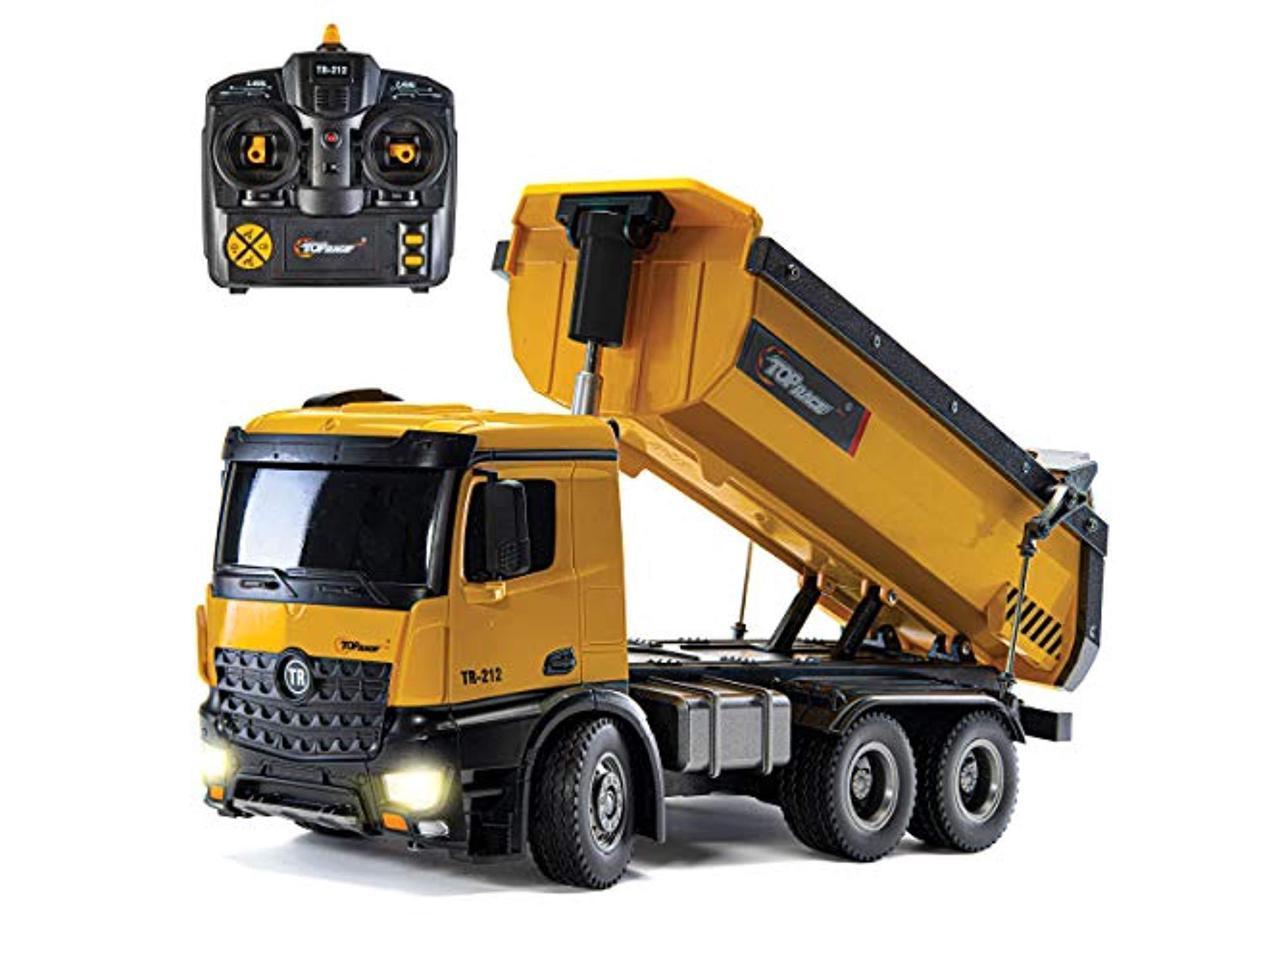 Excavator Top Race 5 Channel Fully Functional Remote Control Construction Truck Kids Size Designed for Small Hands 